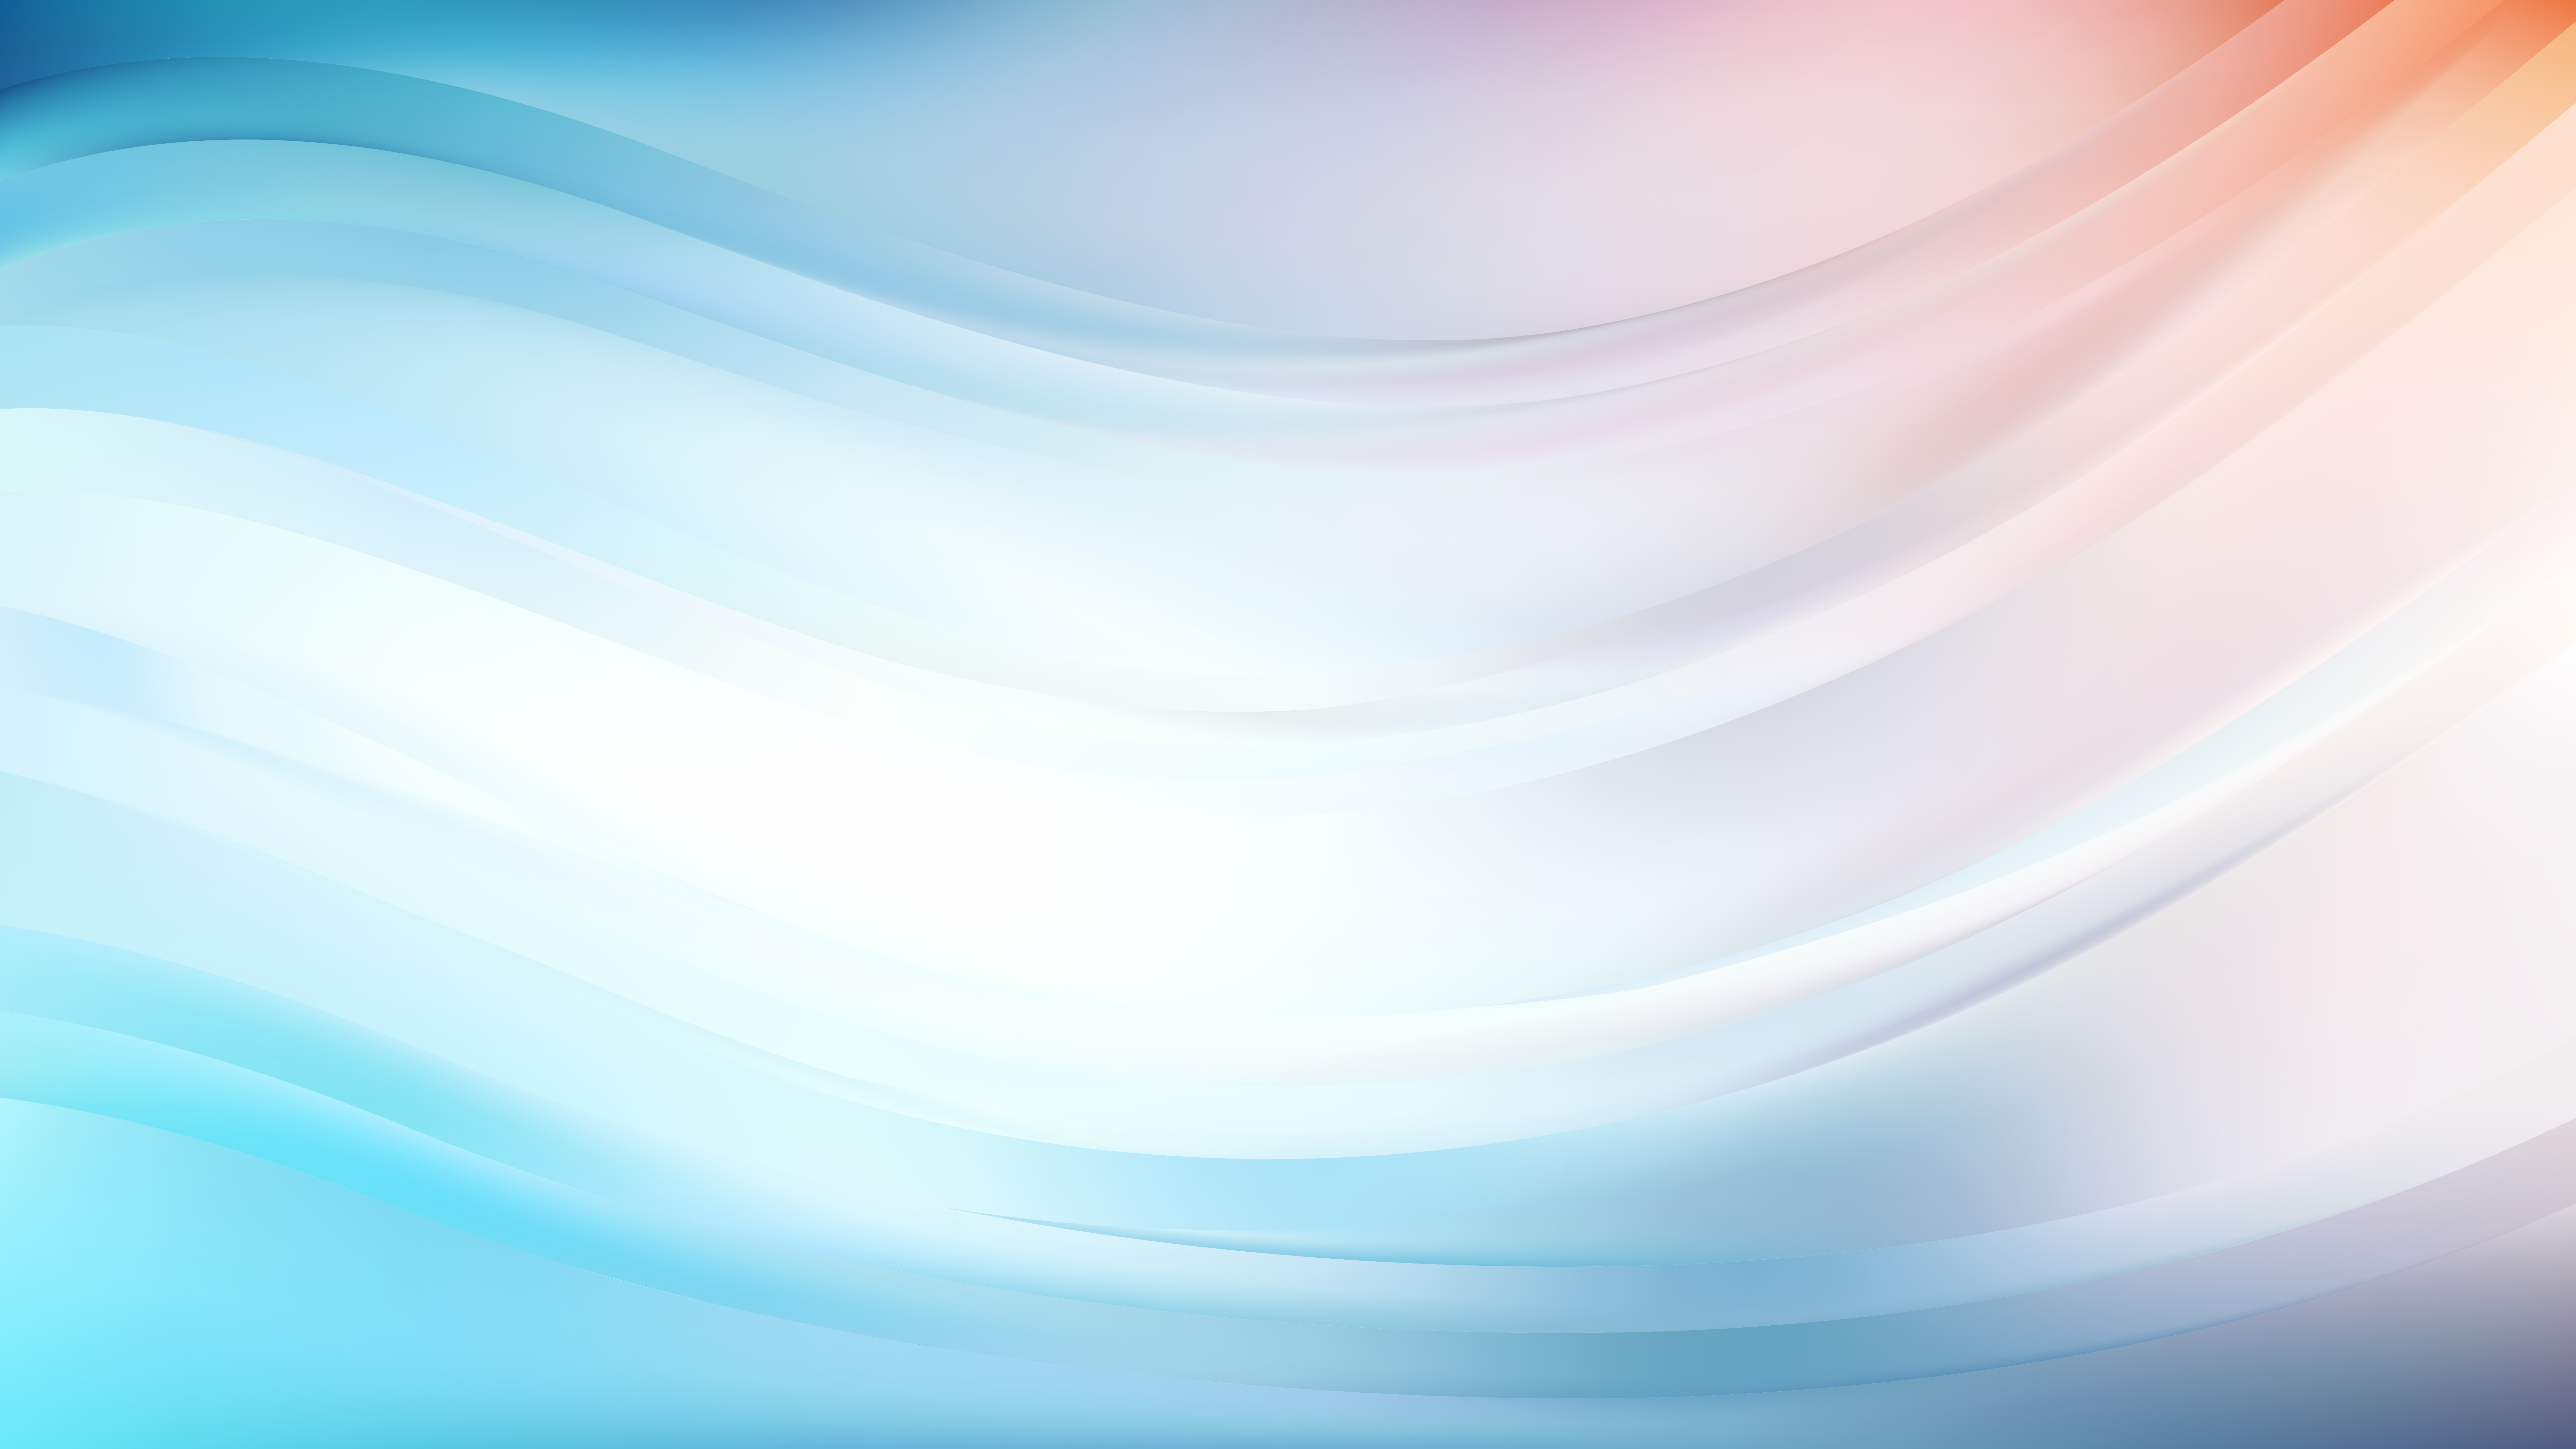 Free Light Blue Abstract Wave Background